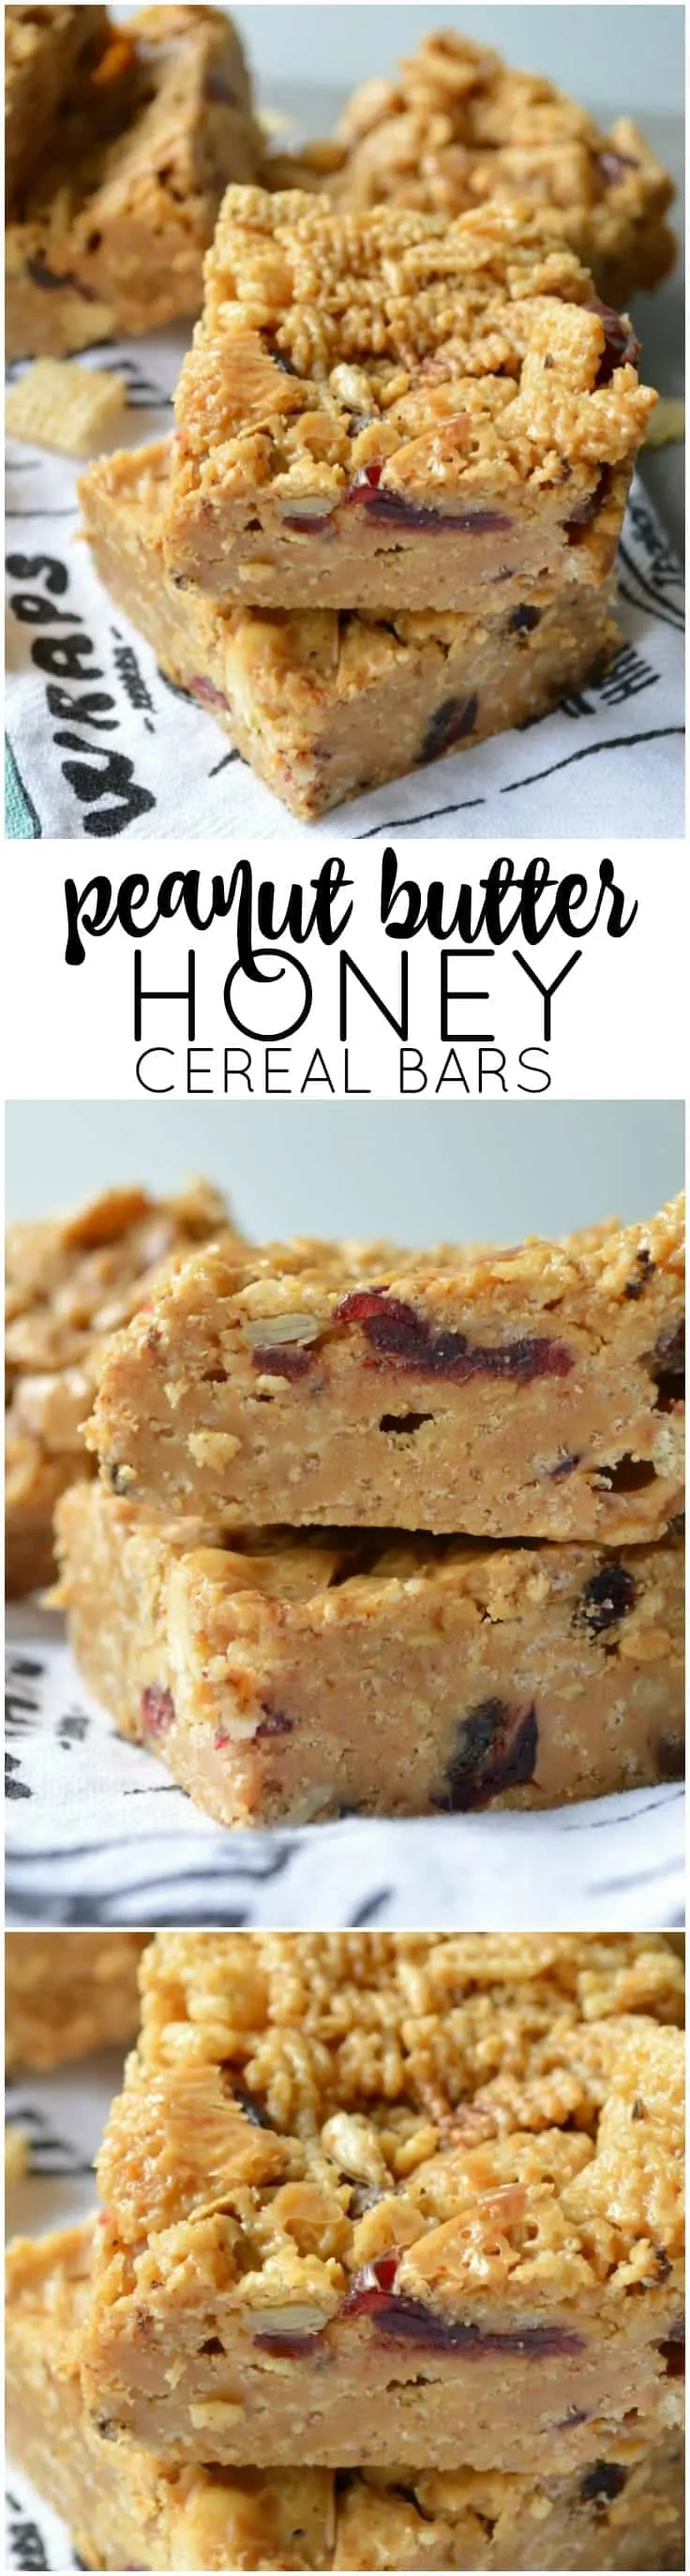 These easy no-bake Peanut Butter Honey Cereal Bars are perfect for snacks, lunch boxes and breakfast on the go!